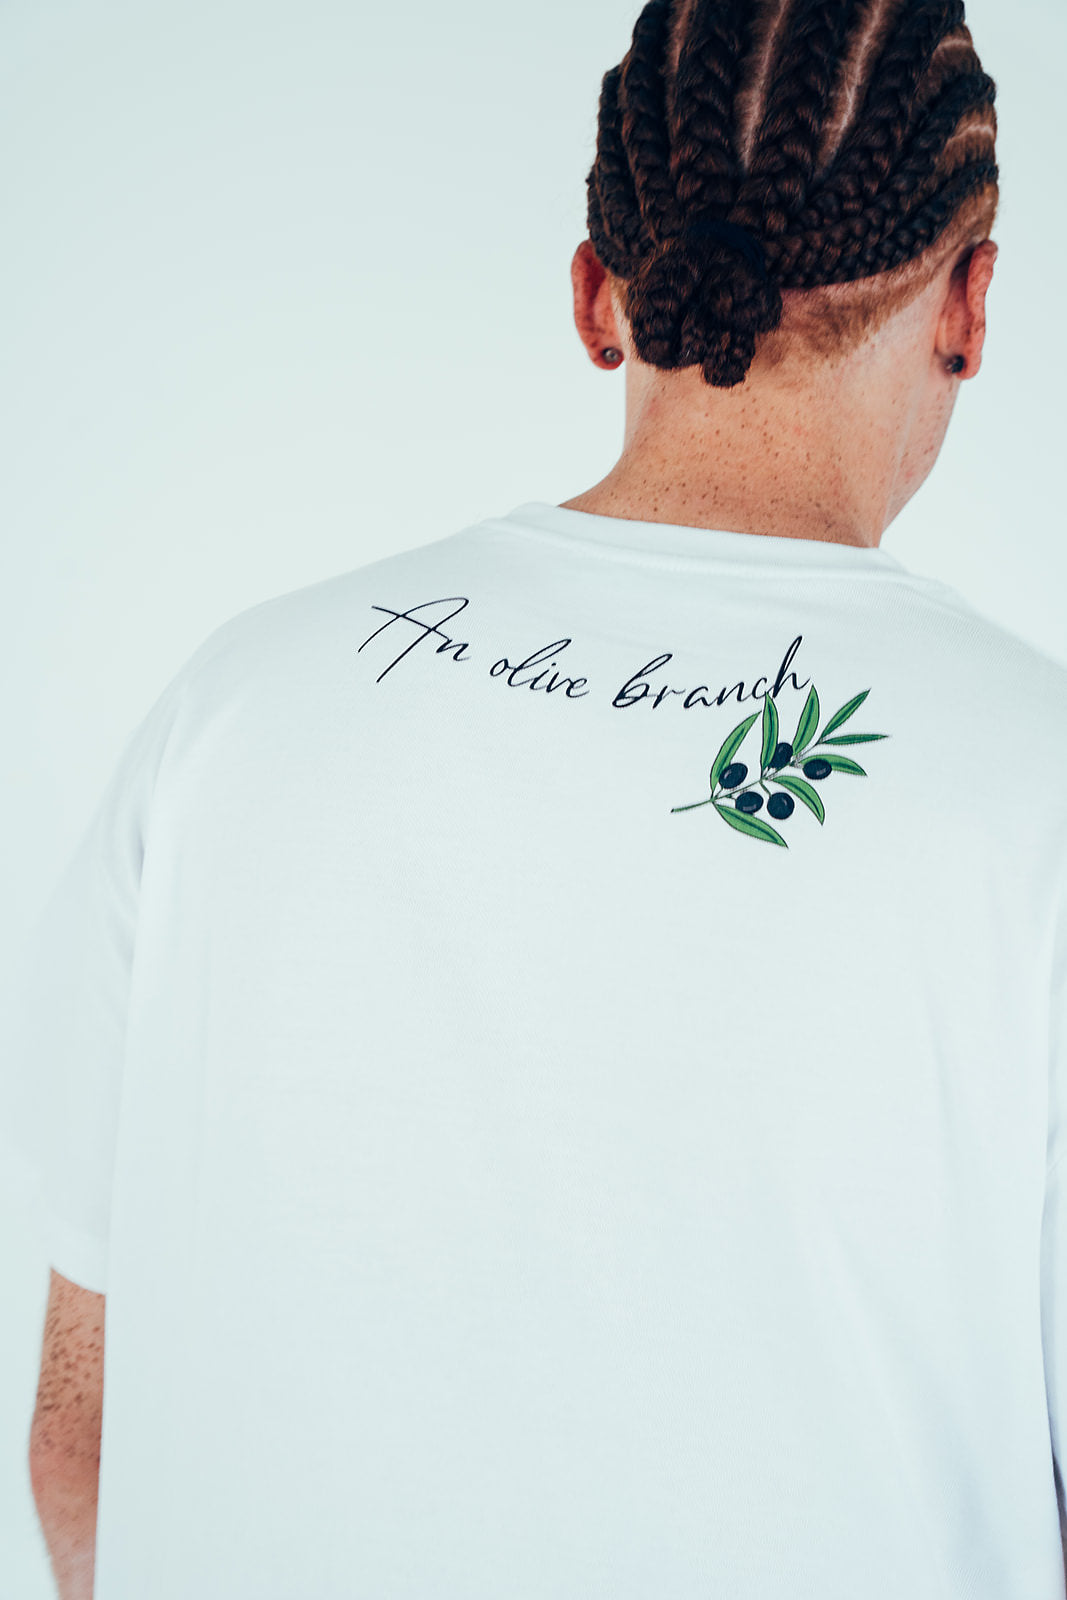 OLIVE BRANCH TEE